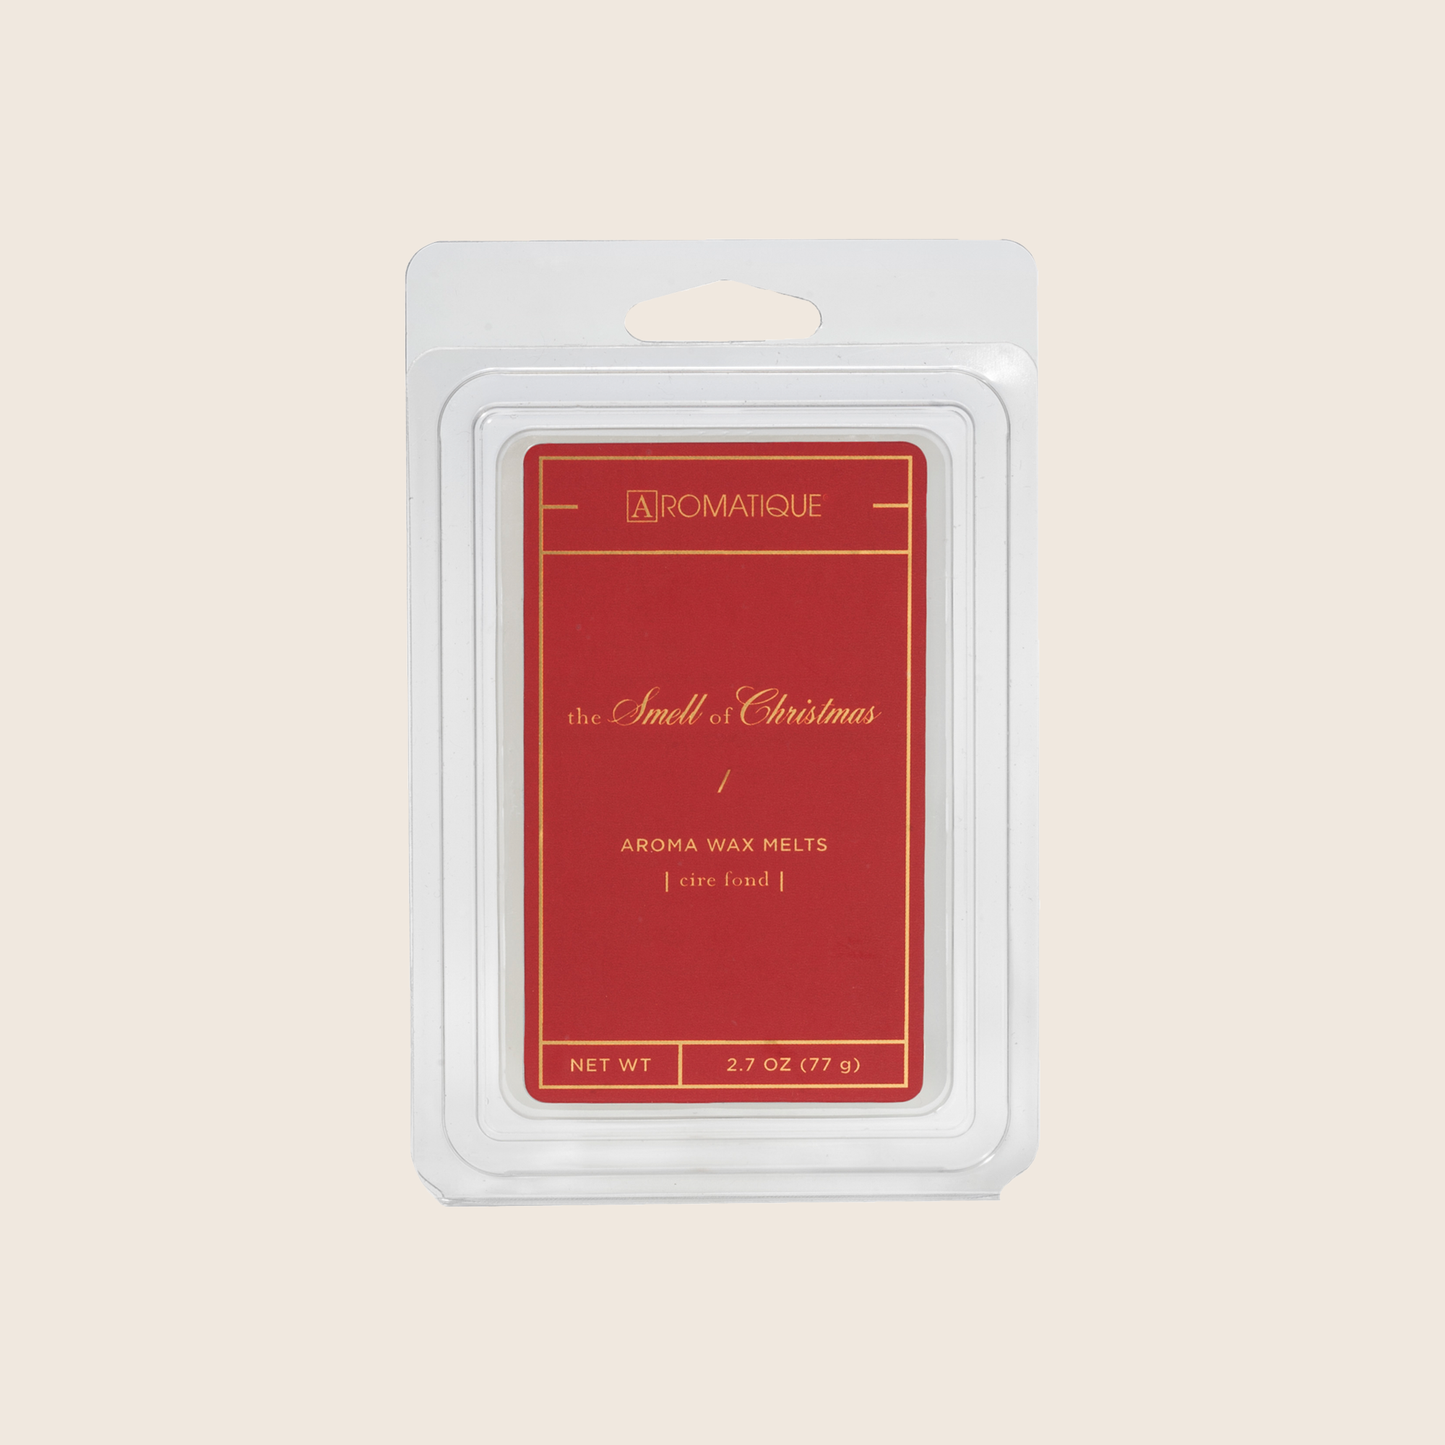 The Smell of Christmas® is our signature fragrance with captivating citrus and spice with a warm blend of natural botanicals. The Smell Of Christmas® Aroma Wax Melts contain a set of 8 cubes made from 100% food-grade paraffin wax and a highly fragrant aroma - no wicks or flames needed.